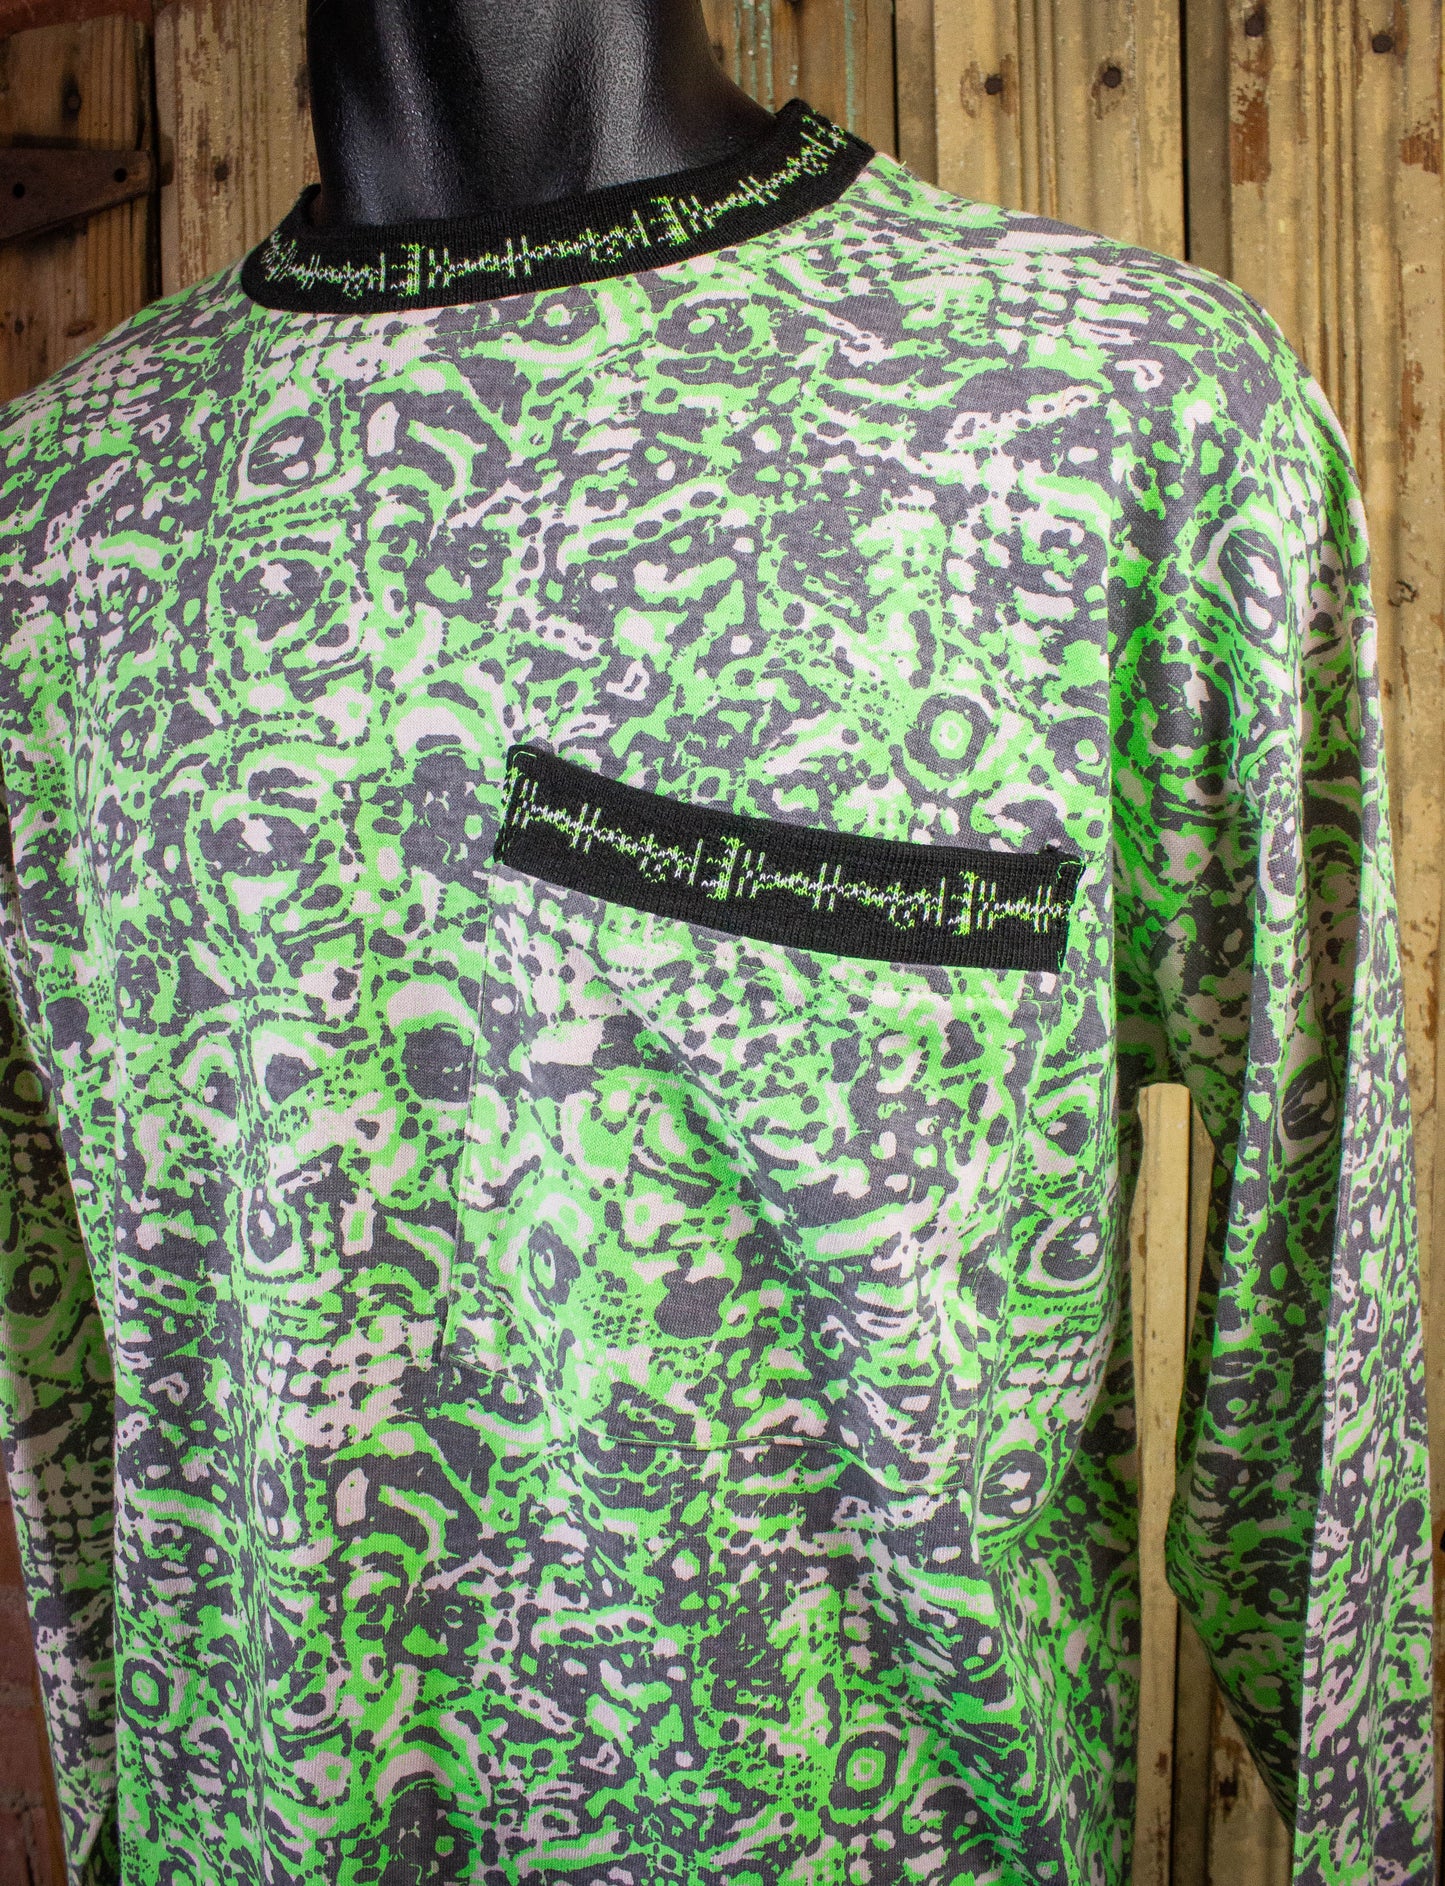 Vintage New Planet Patterned Long Sleeve Skater Shirt 80s/90s Green, White, and Black Large